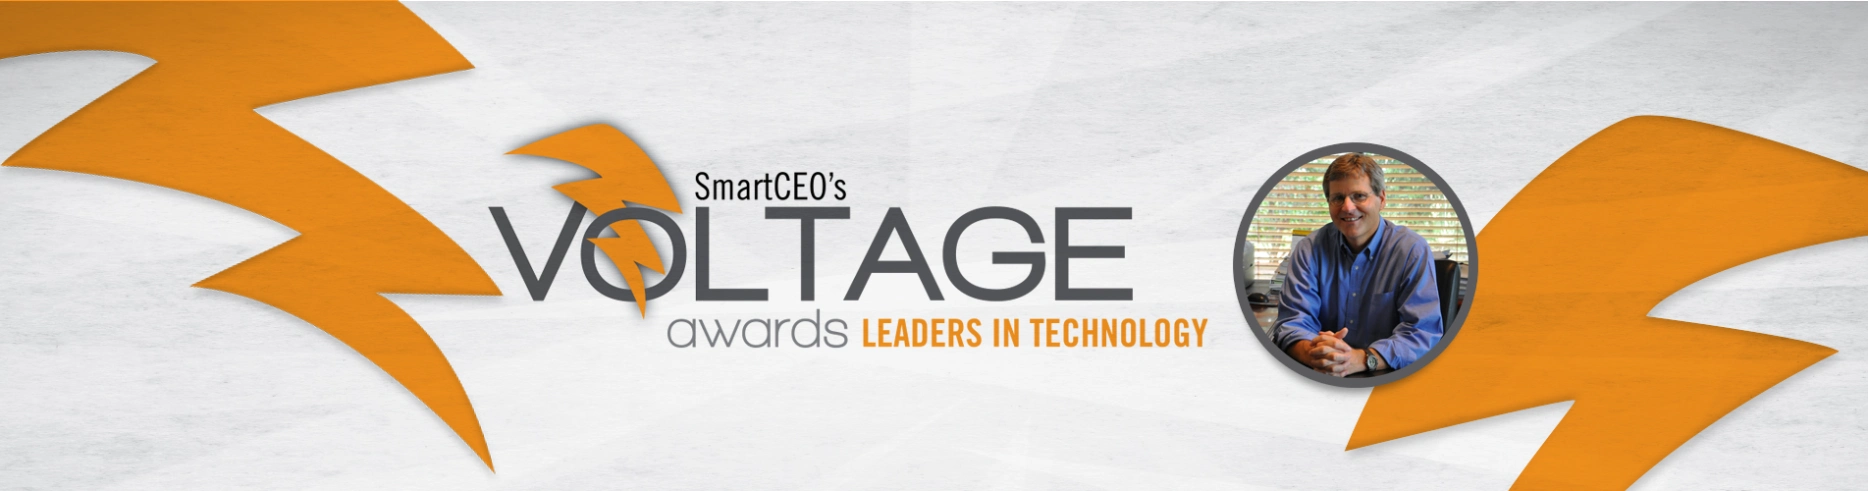 smart ceo's voltage awards; leaders in technology 2013